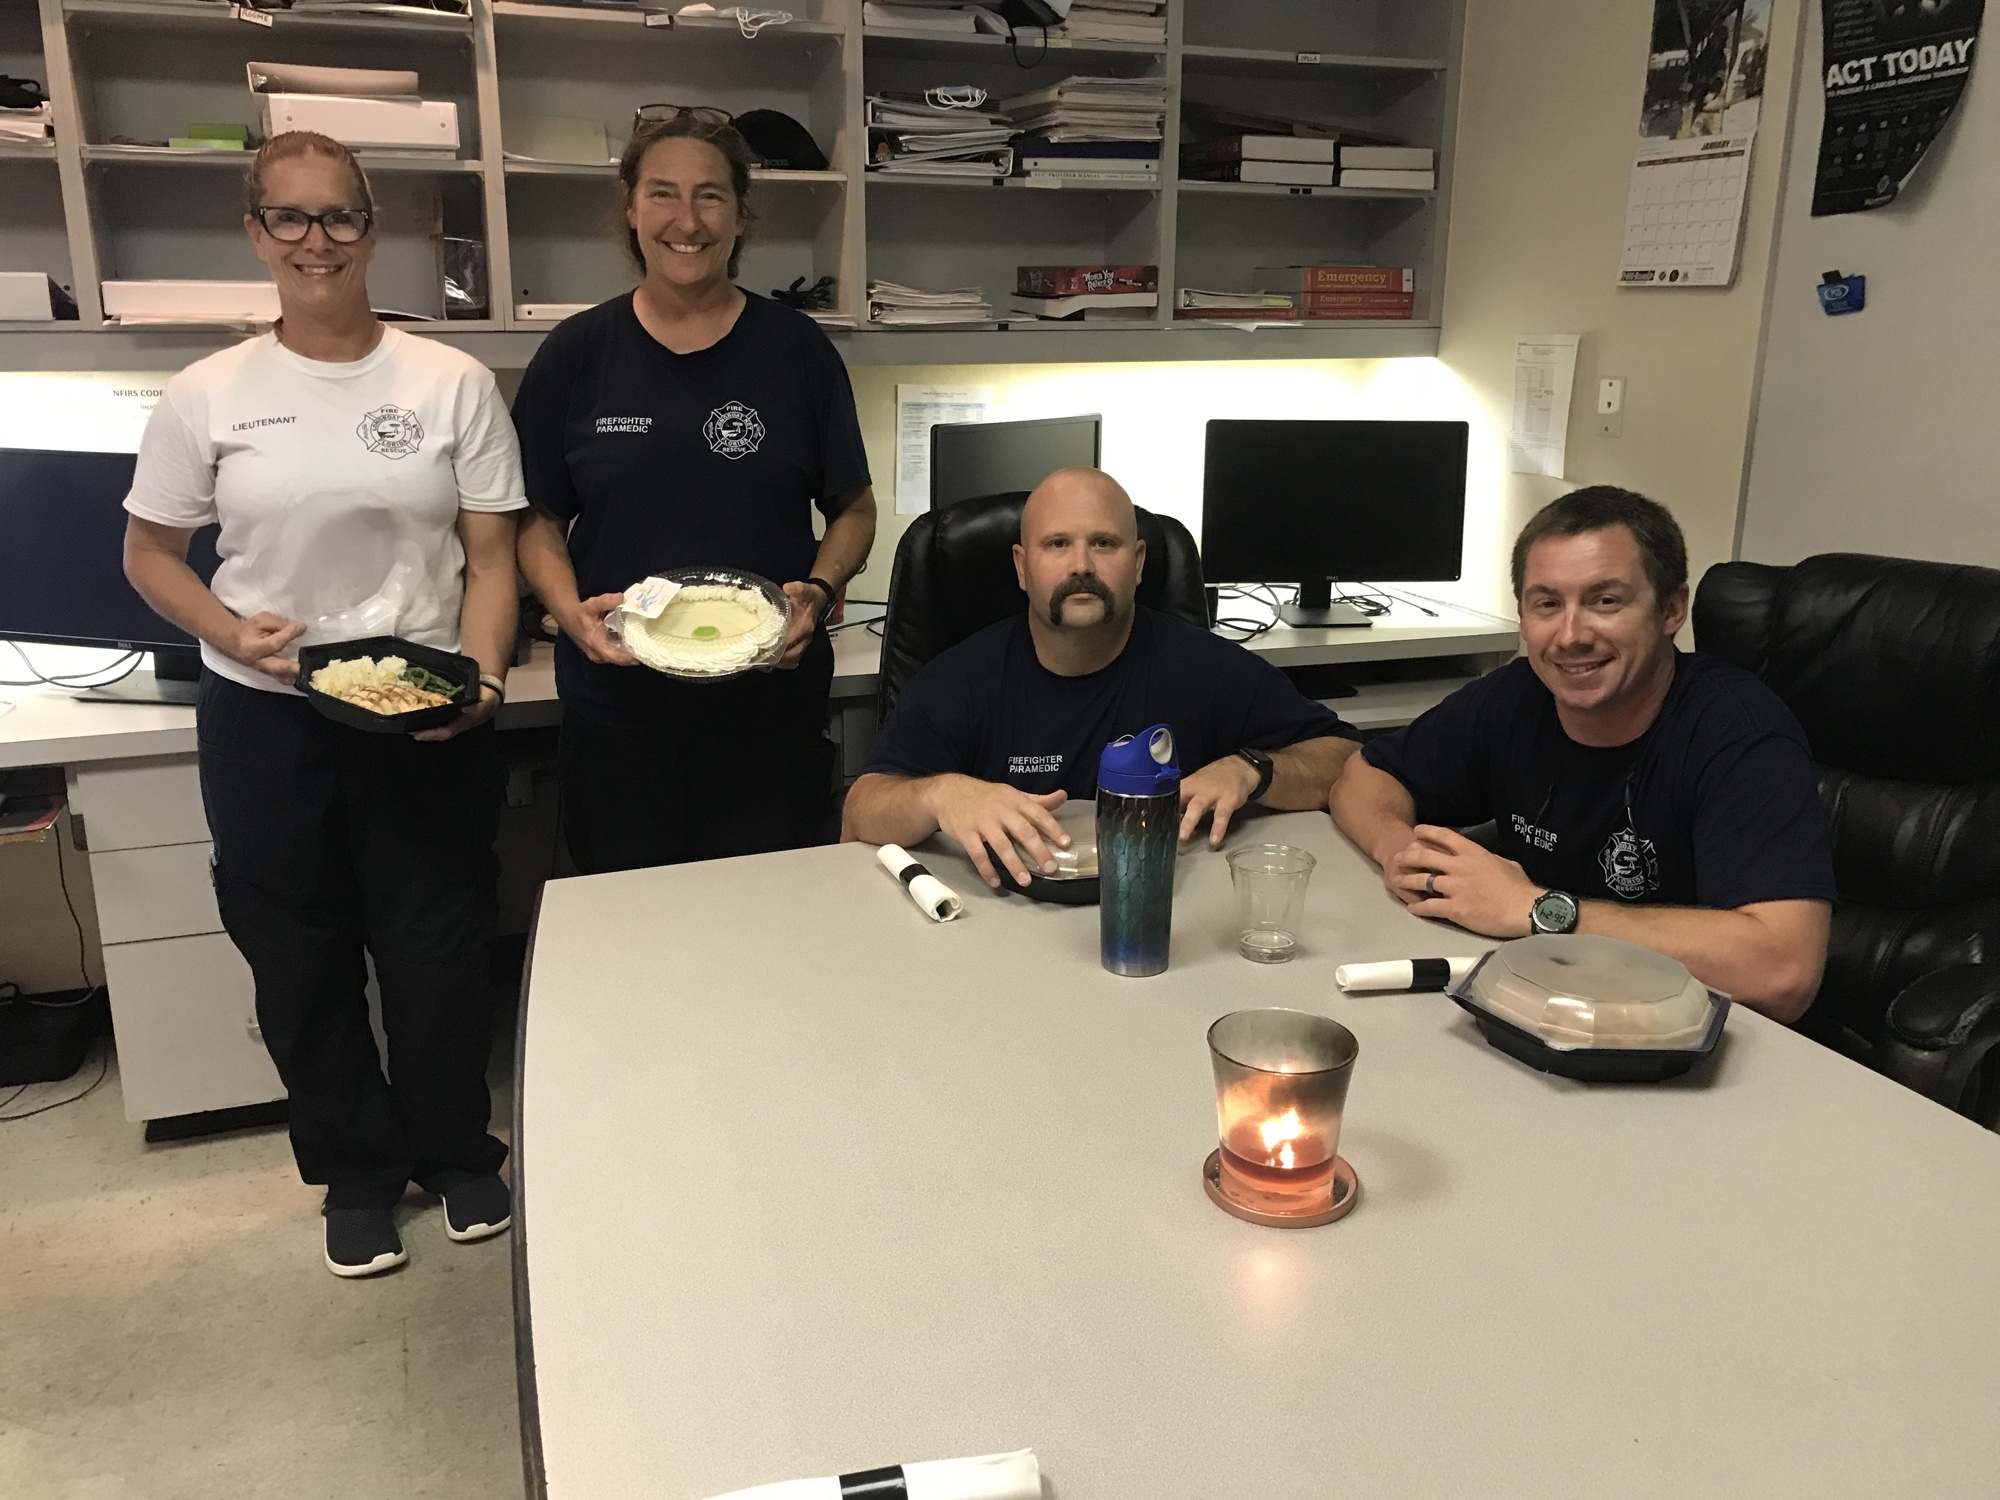 Lietenant Kerri Brooks, firefighter/paramedics Dawn Dunkum, Richard Roome and Chase Opela receive meals from Chart House. Photo courtesy of Tina Adams.